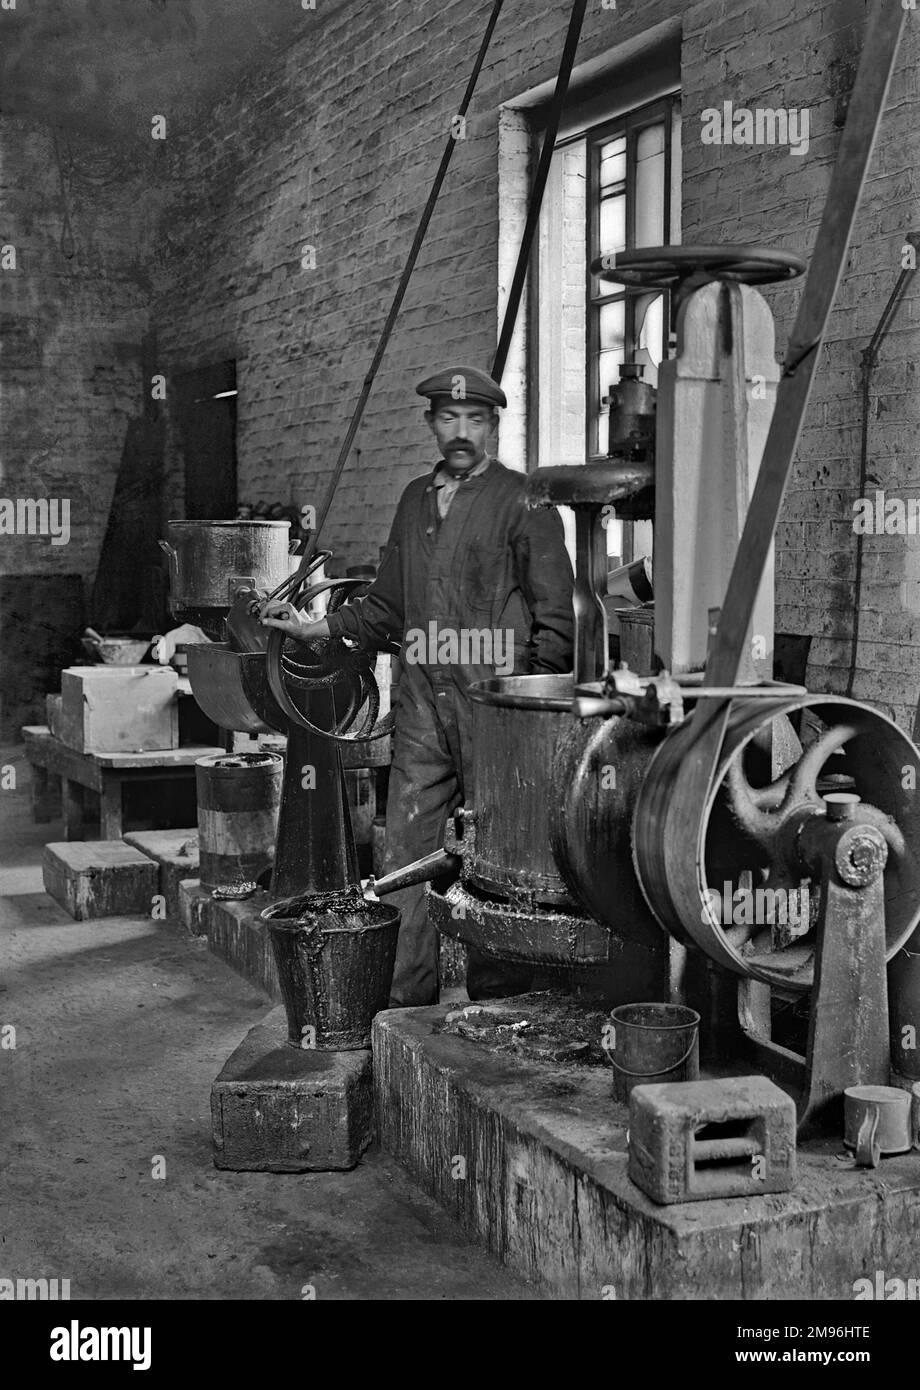 Workman in a factory operating machinery. The factory produced lead shrapnel for the use in high explosive artillery shells during WW1. Stock Photo